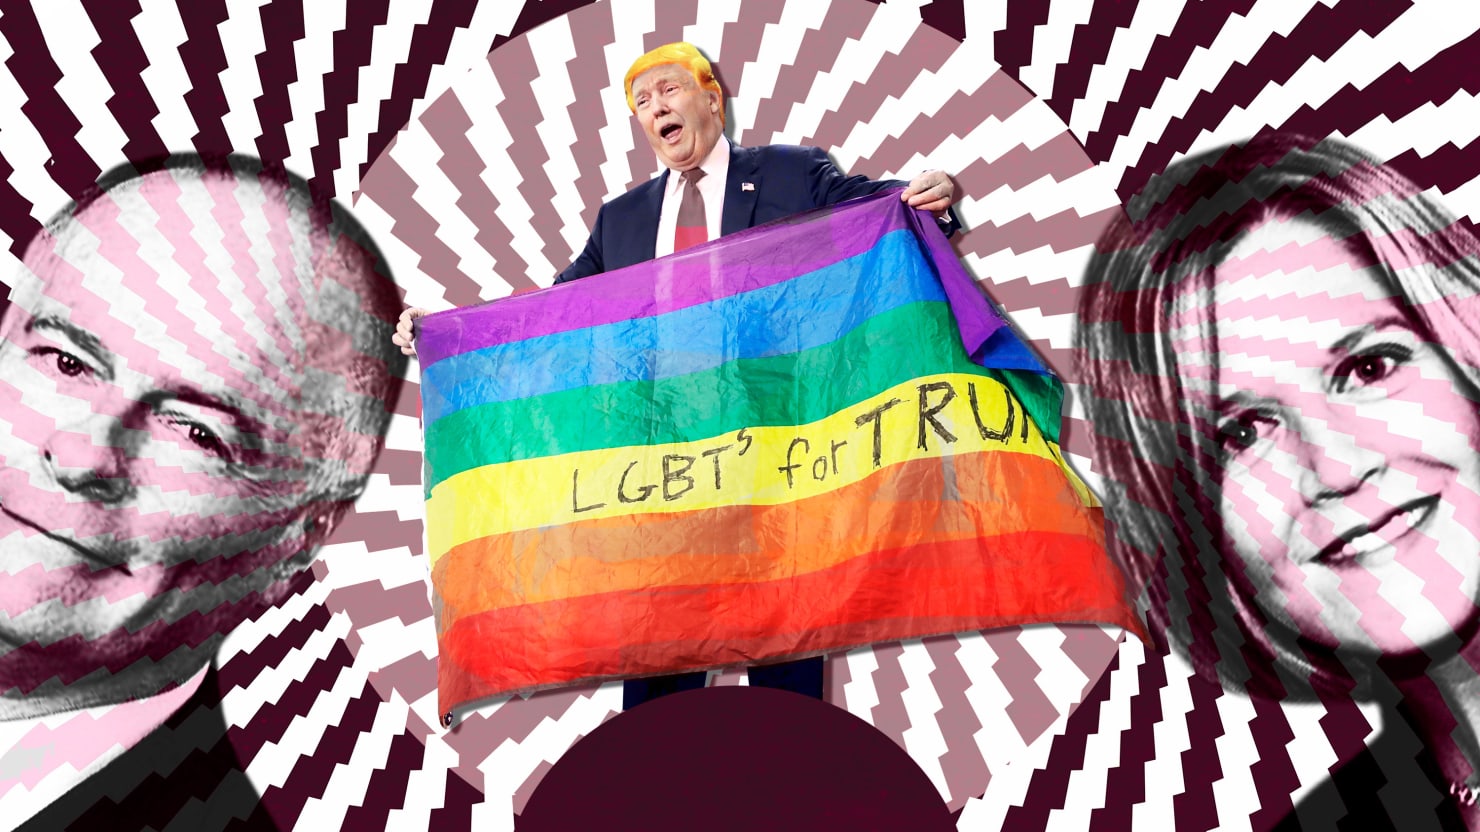 The Reality Defying Shame Of Lgbtq Log Cabin Republicans Who Endorse Trump